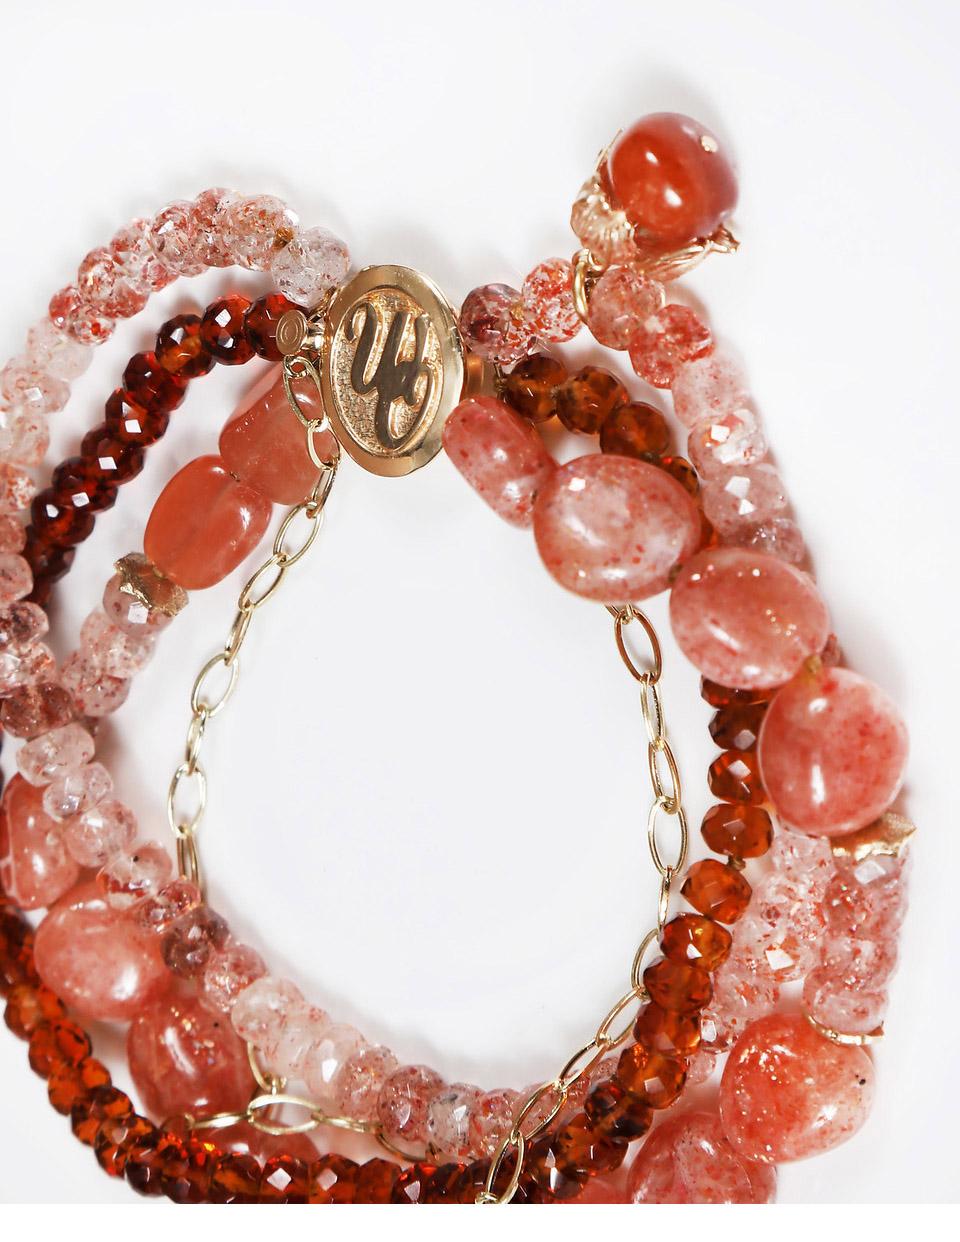 This multi-strand bracelet celebrates mandarin garnet, strawberry quartz, and polished sunstone. Chain encircles the bracelet and draws it together with a White Orchid Studio logo clasp.  All gold is 14kt yellow. 7.75